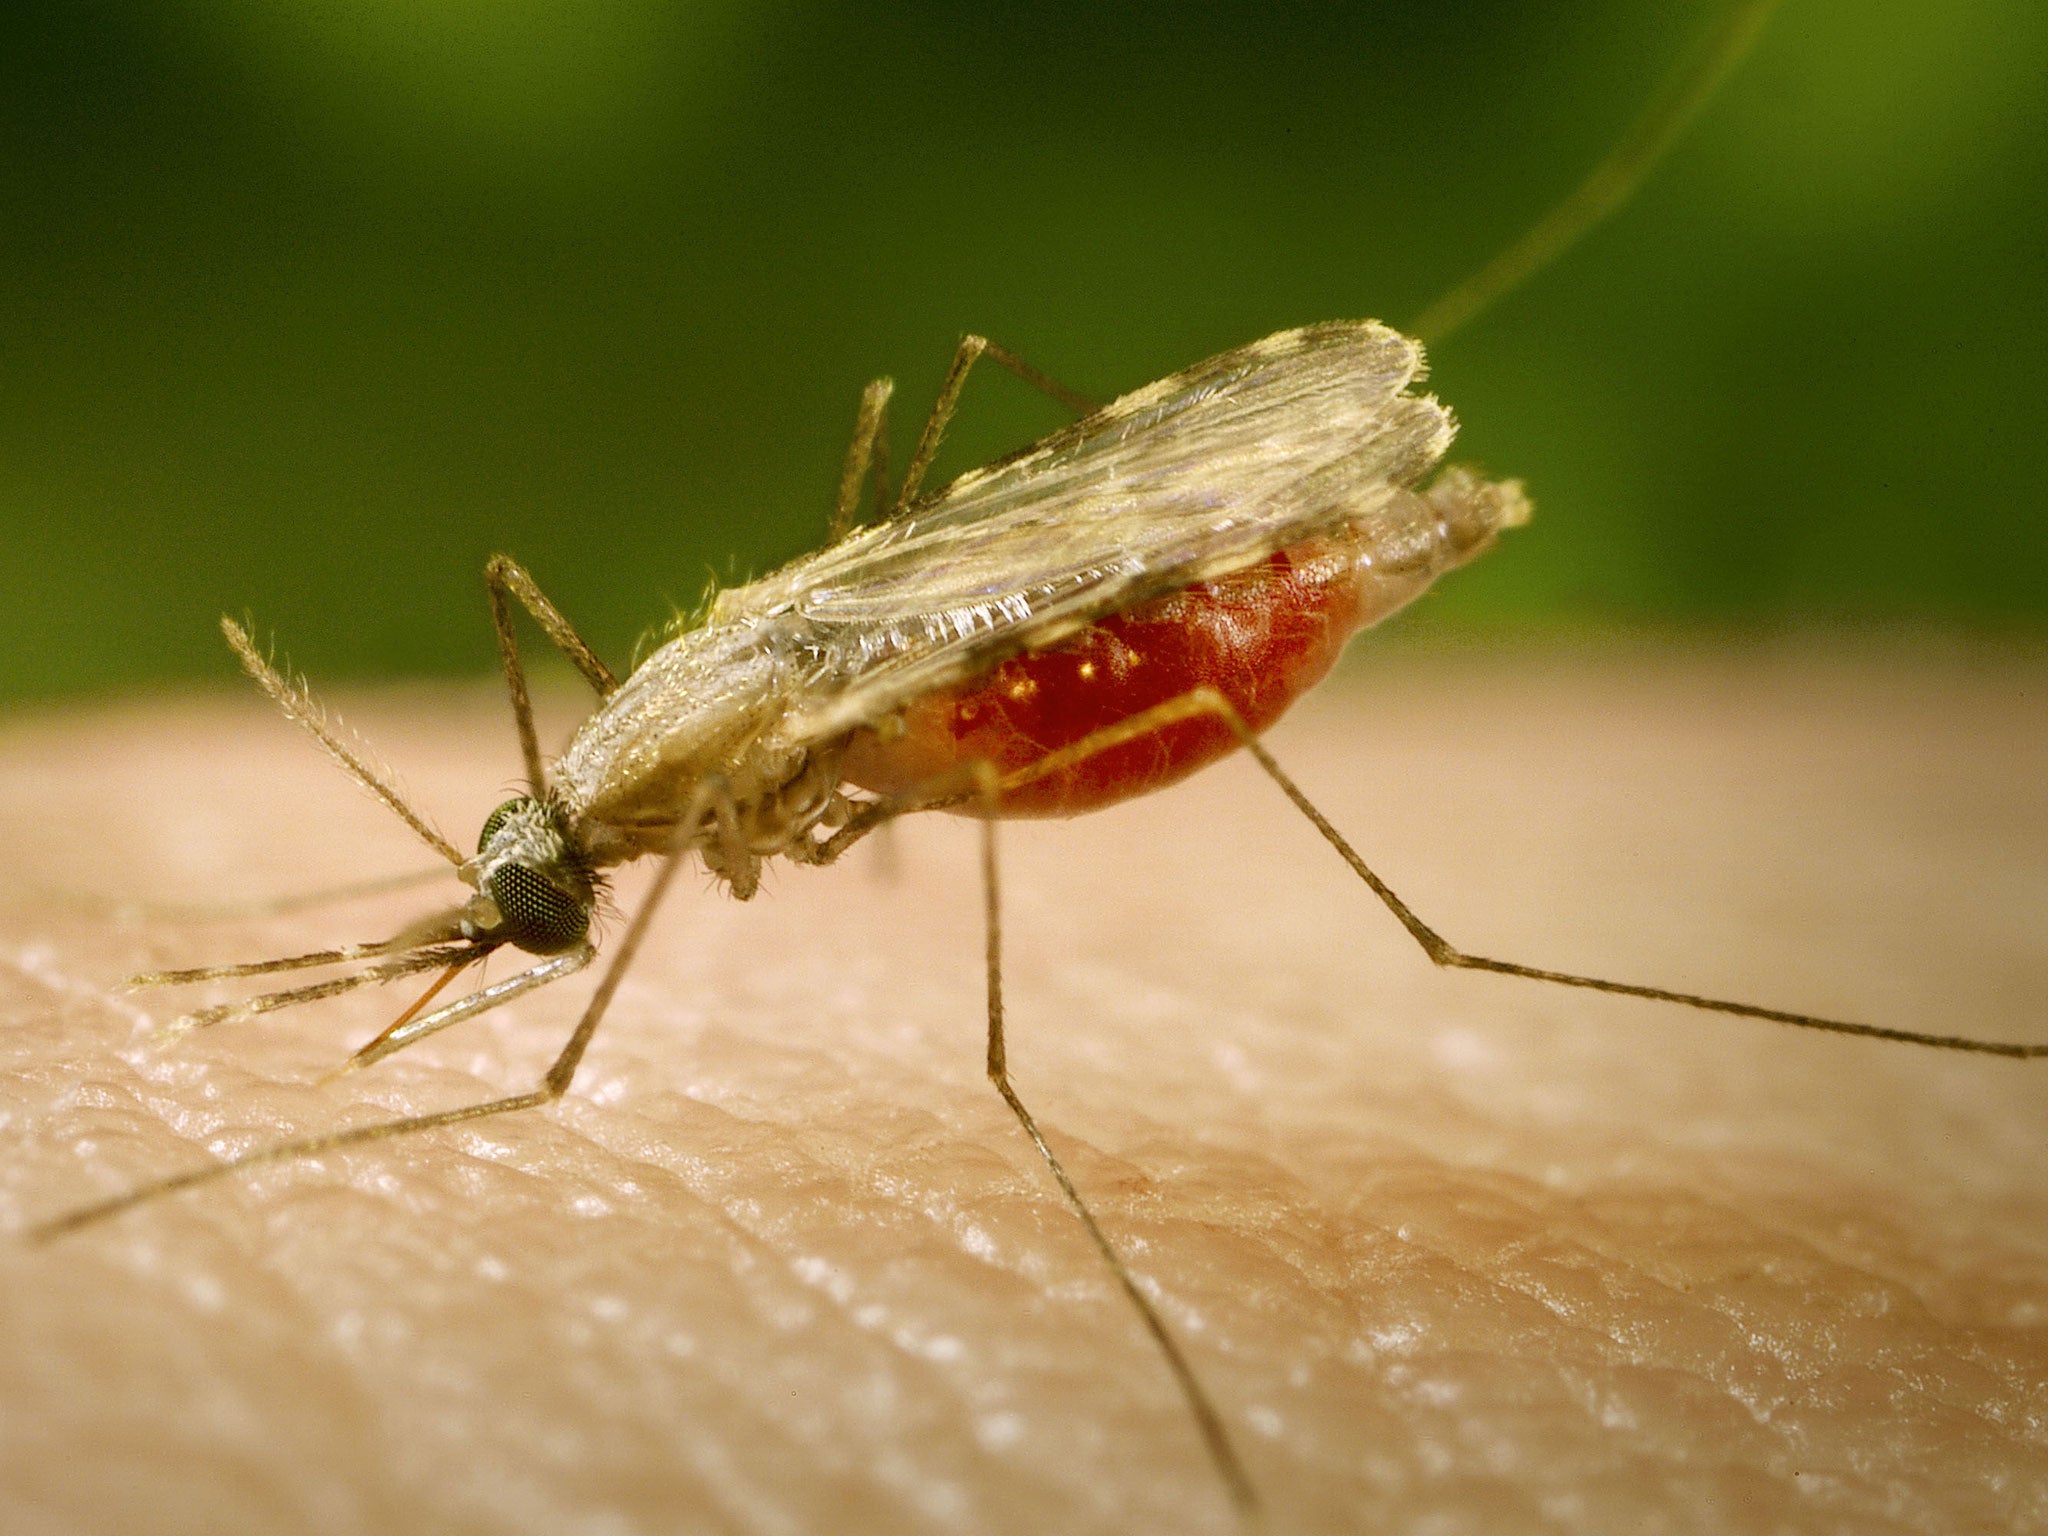 The hot and wet weather conditions have created a "perfect storm" for biting insects such as mosquitos to breed.